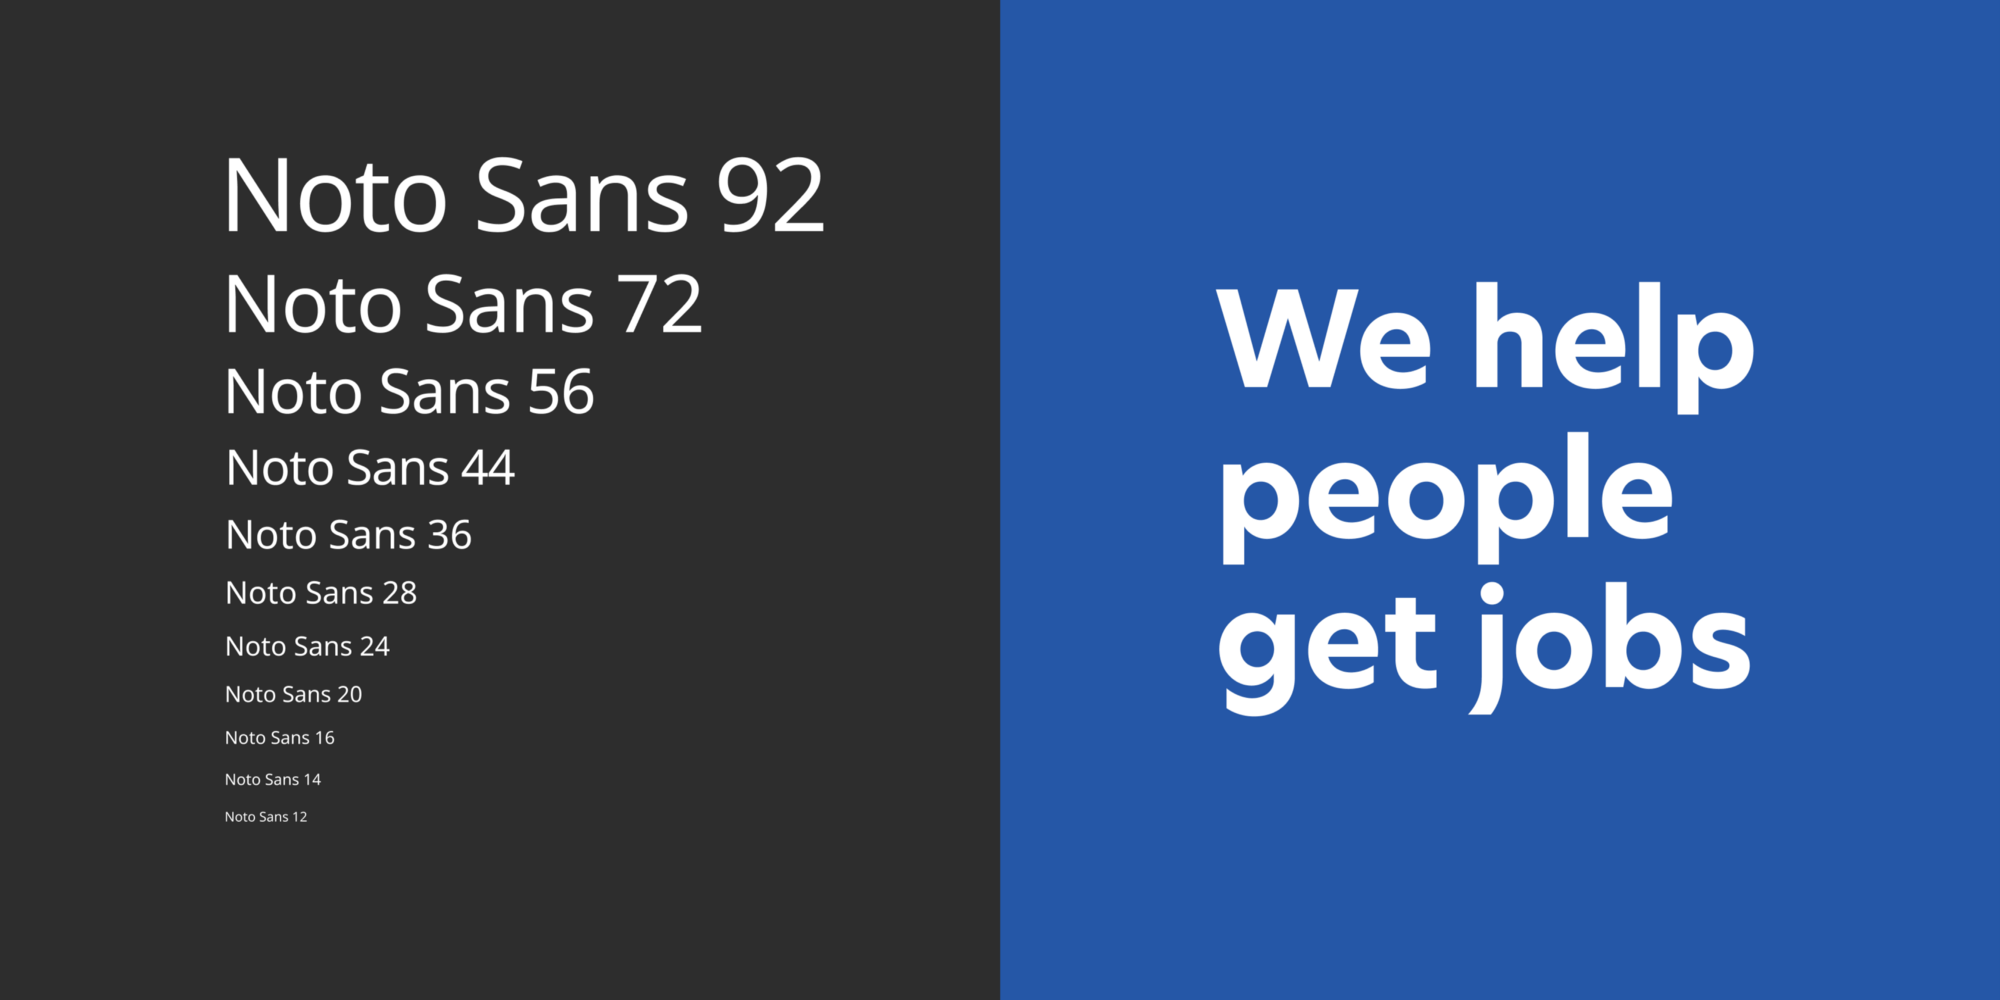 Split image showing Noto Sans type in different sizes next to text “We help people get jobs” in Indeed Sans.